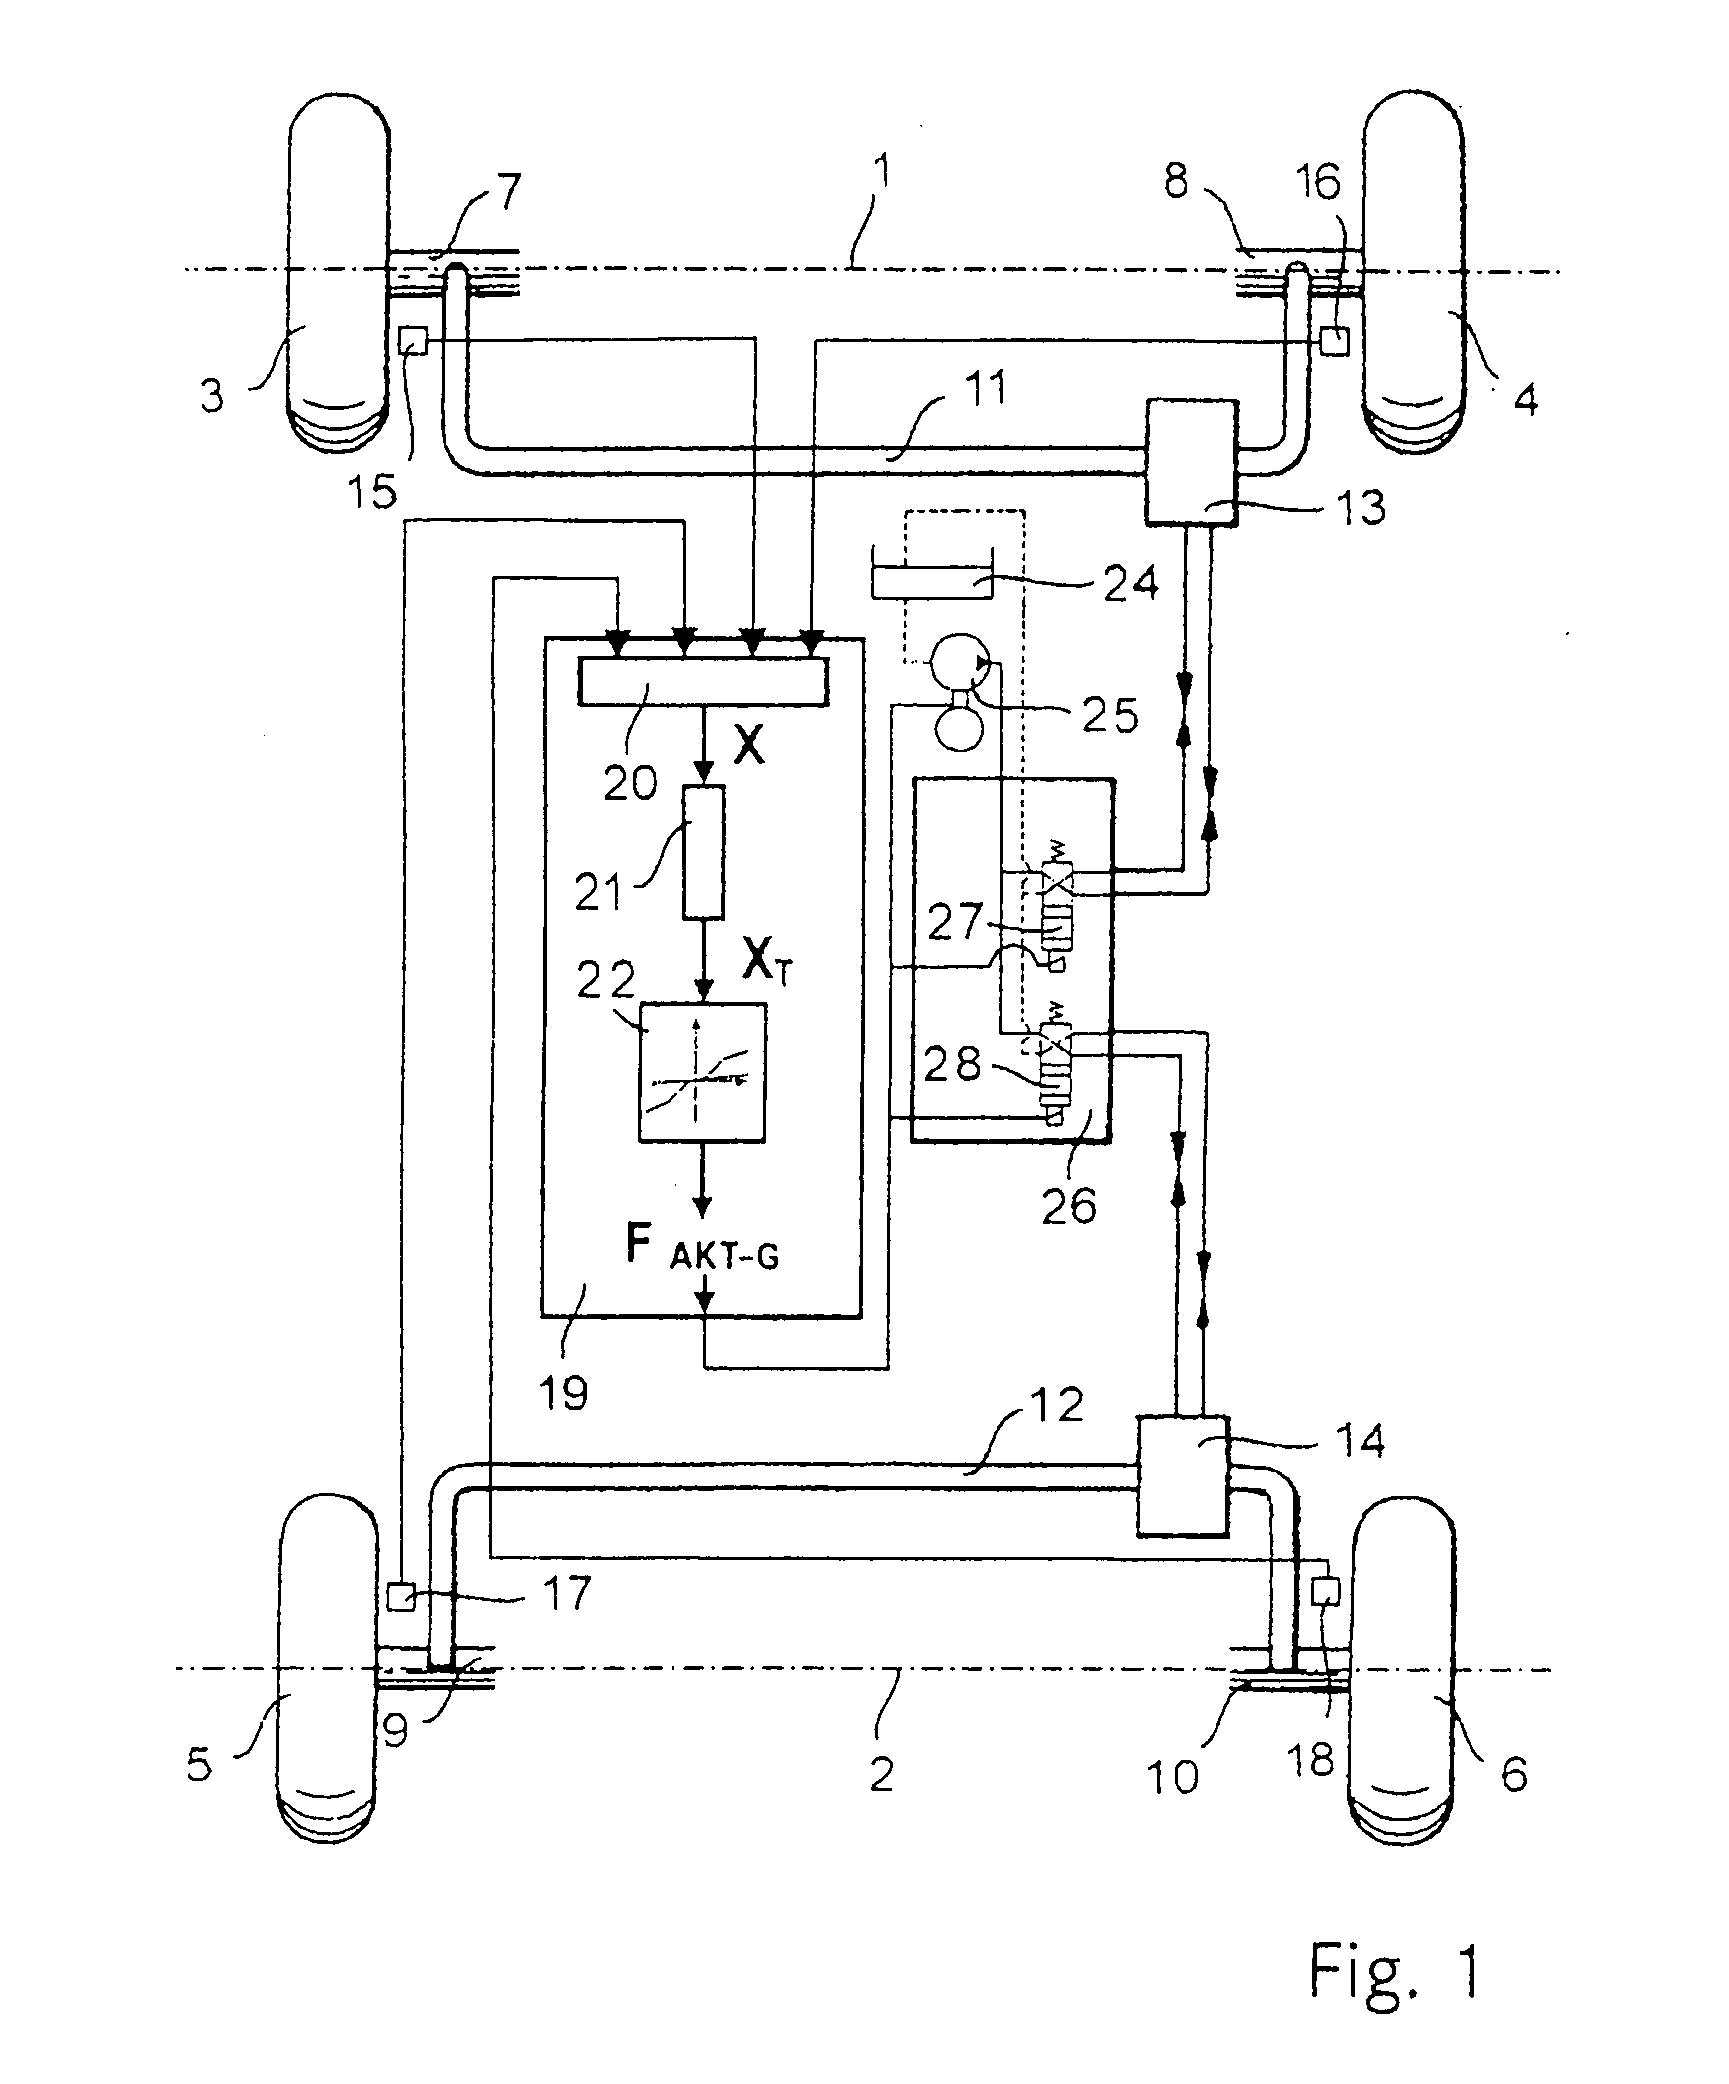 Method of controlling a vehicle wheel suspension